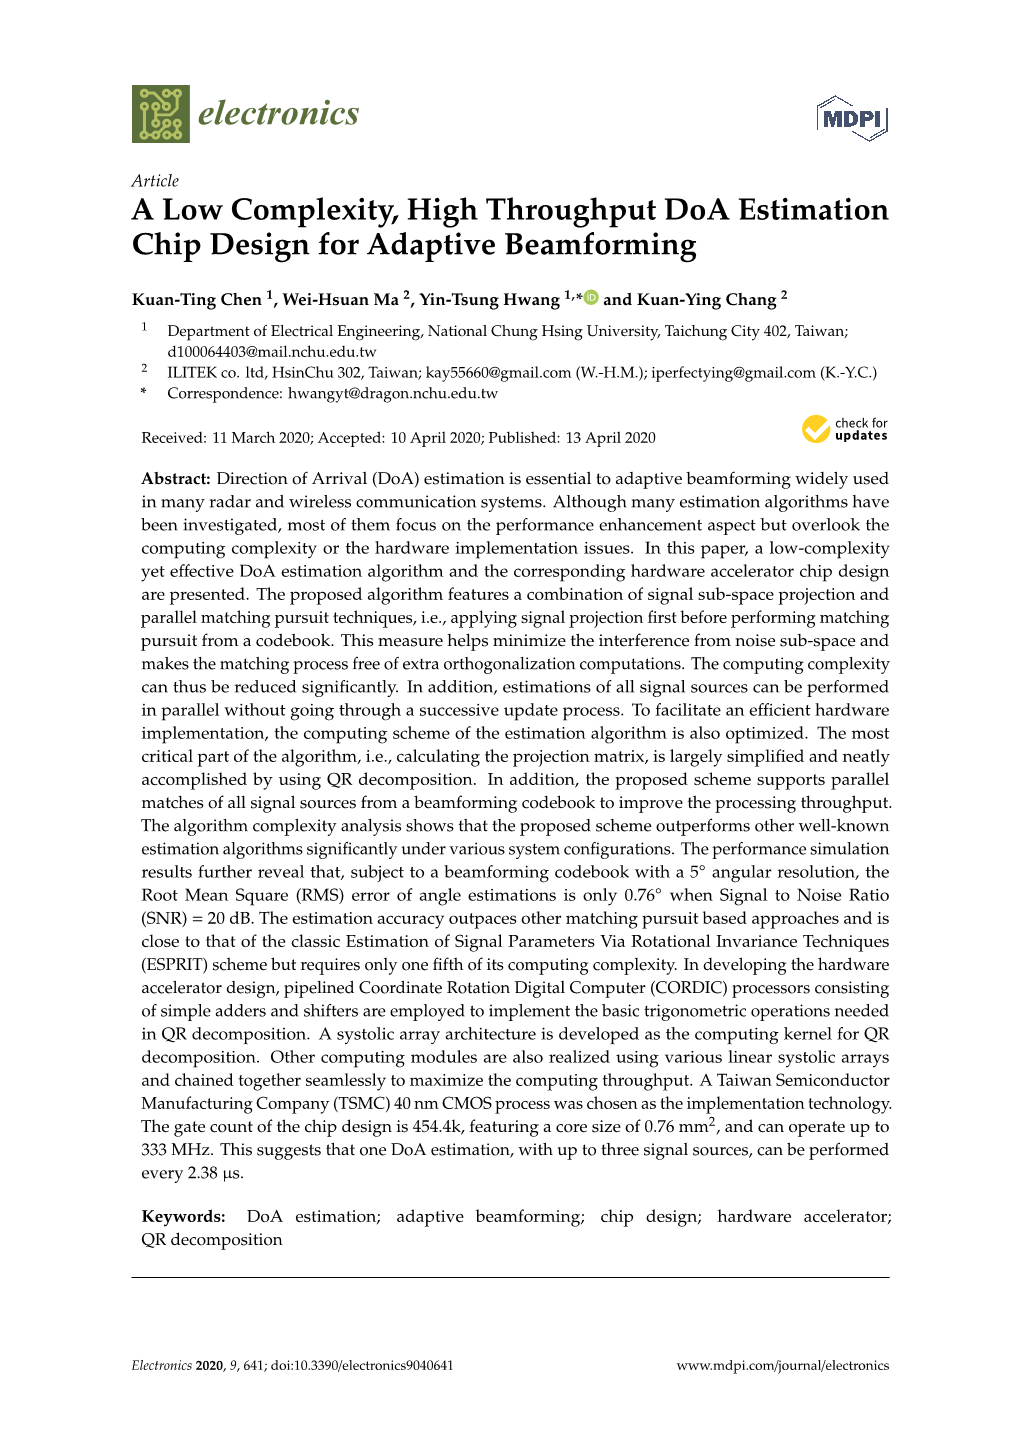 A Low Complexity, High Throughput Doa Estimation Chip Design for Adaptive Beamforming